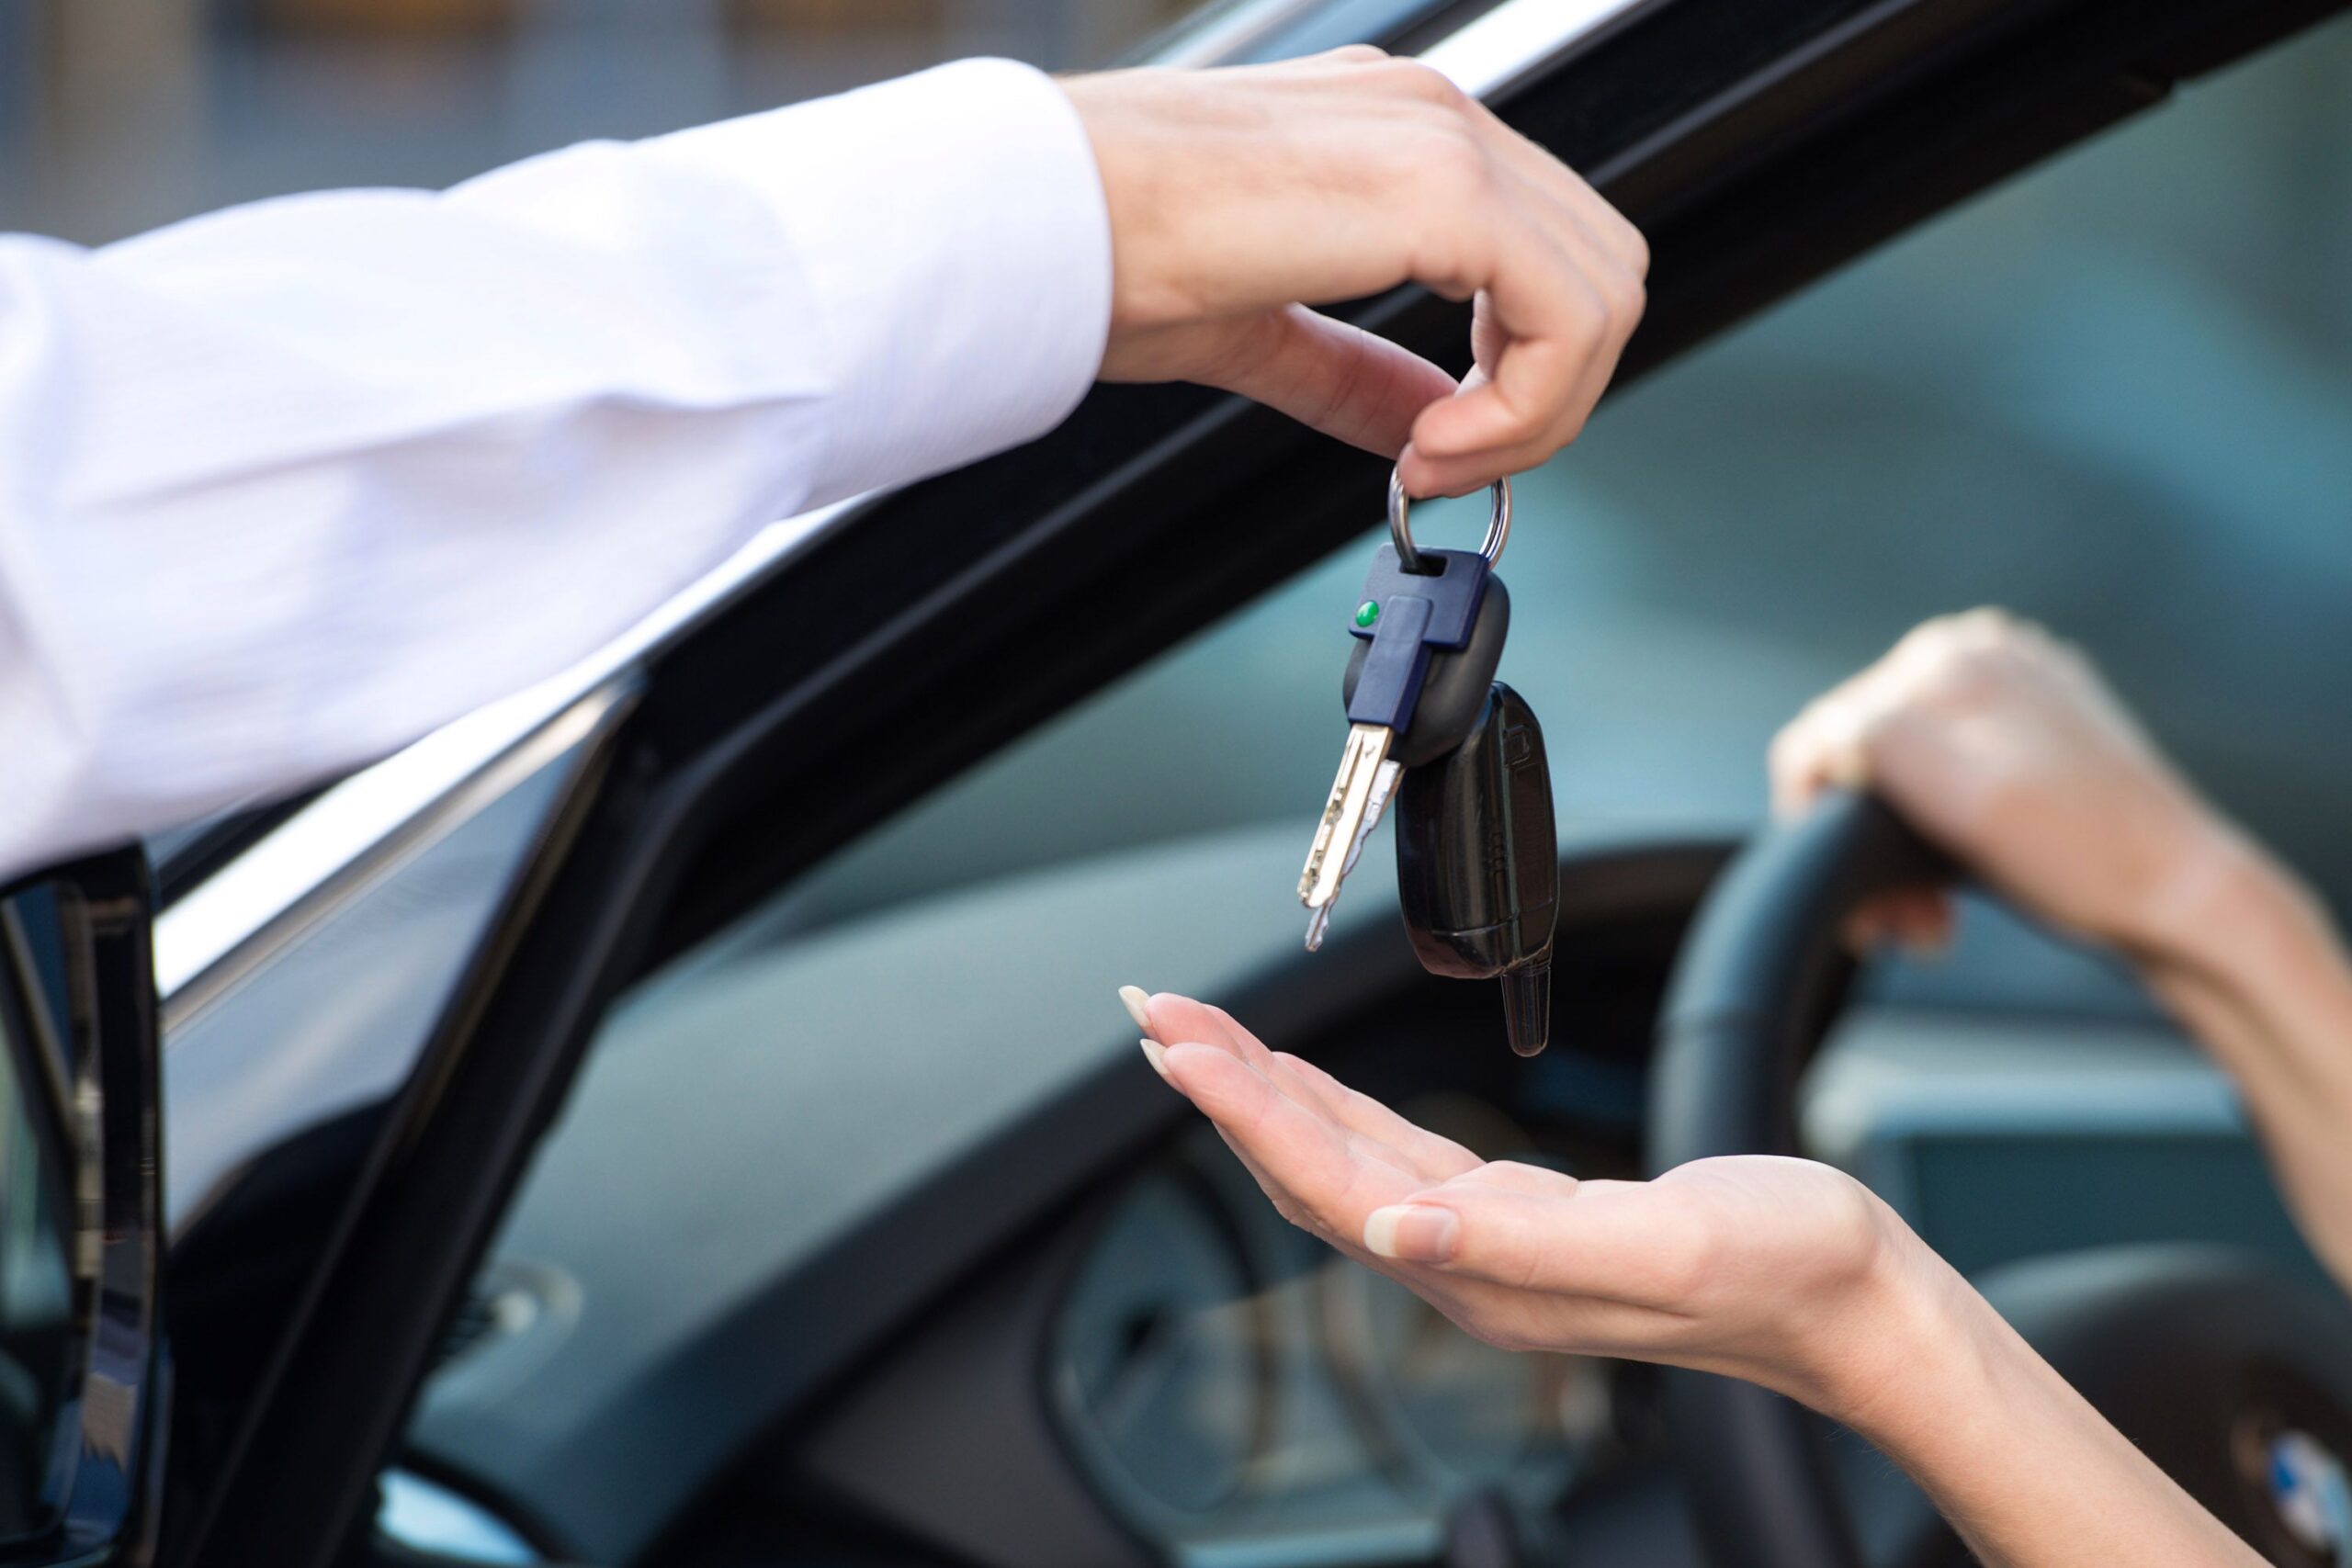 Vehicle rental company insurance is an important investment for a rental car business since it protects the financial assets of the business owner.